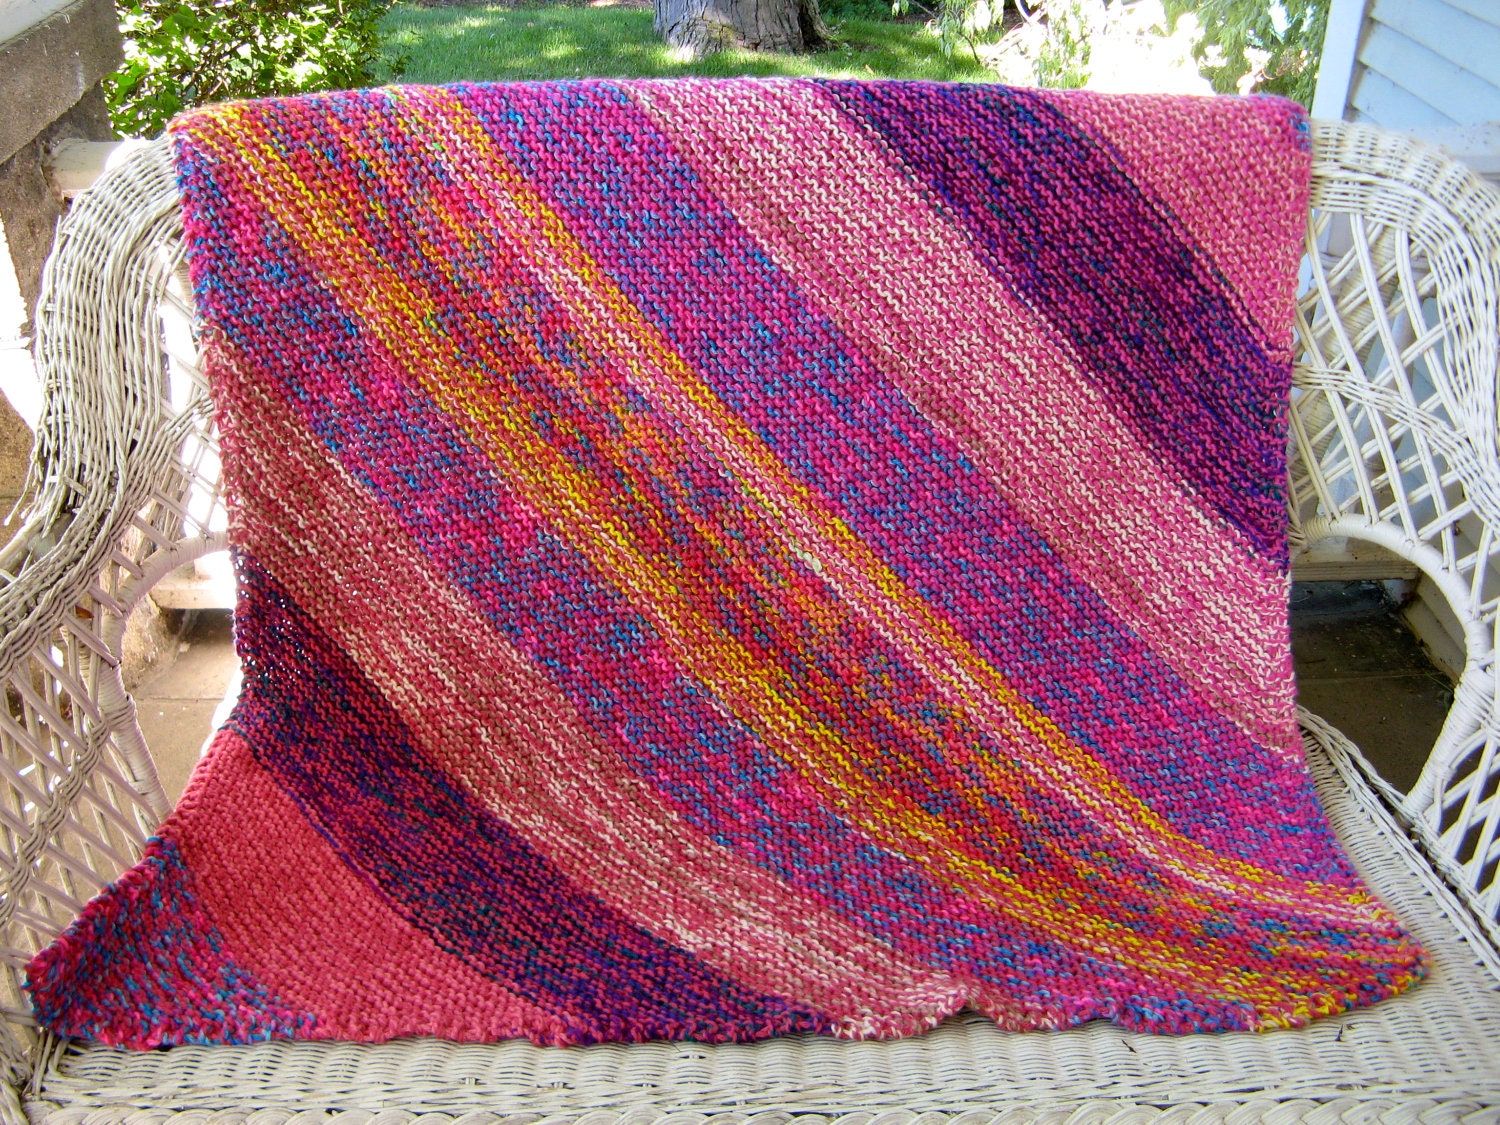 Brightly Colored Knit Afghan/ Throw in Pink, Yellow,Blues and Cream-  41 x 43 inches